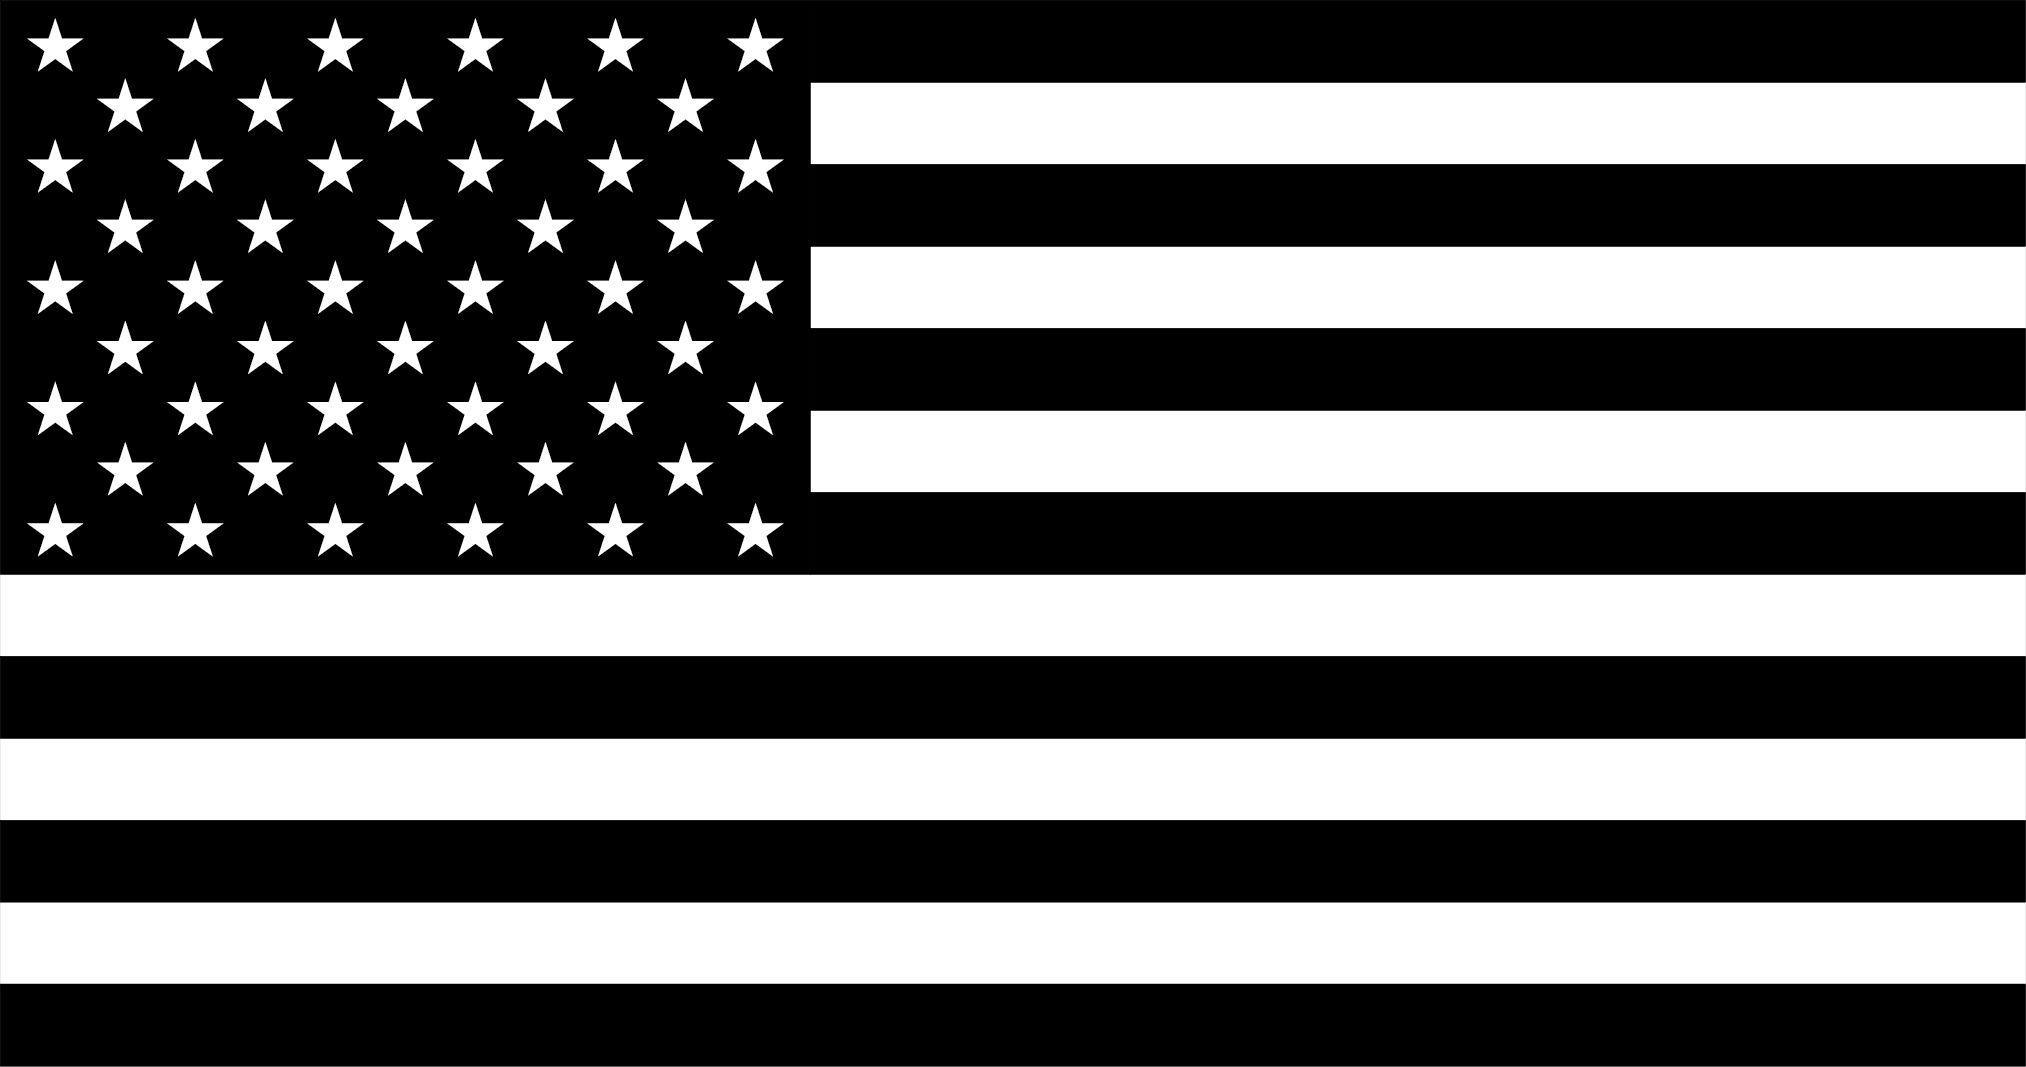 American Flag Black and White Wallpapers - Top Free ...